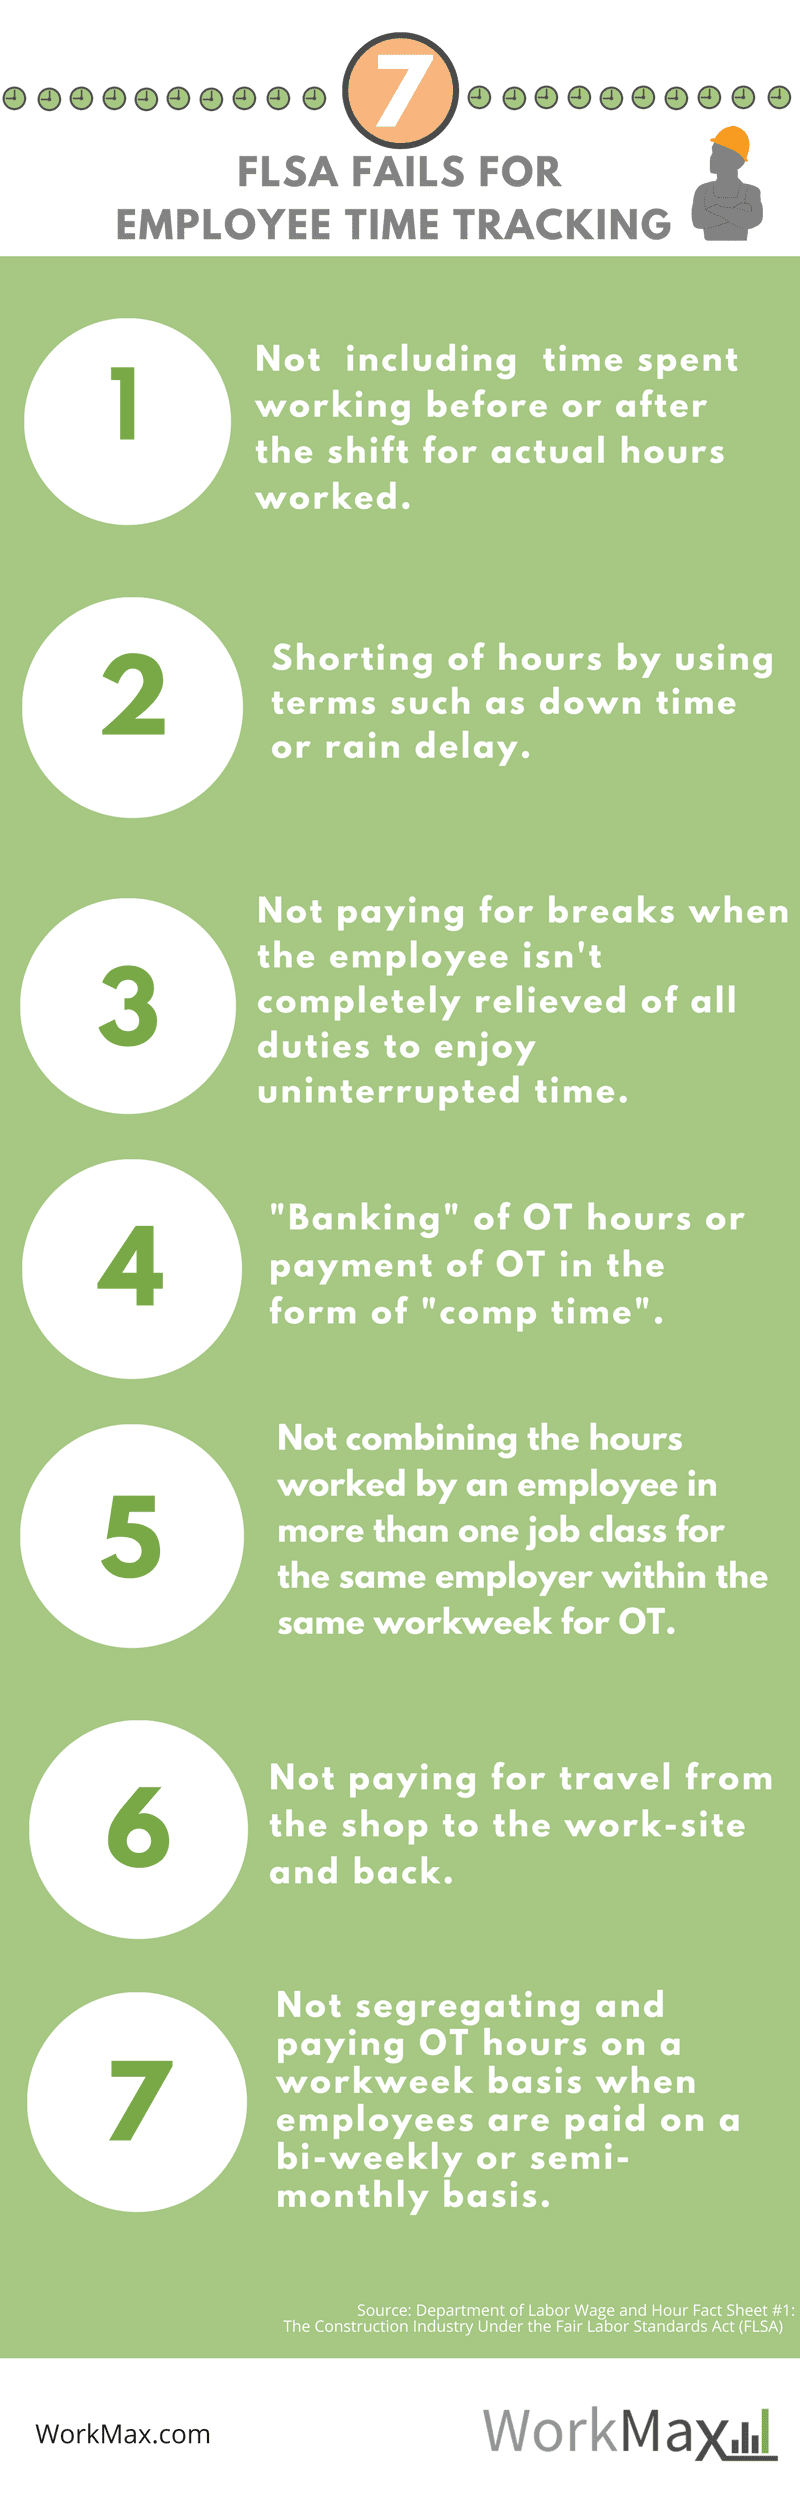 WorkMax TIME 7 FLSA Fails for Employee TIme Tracking